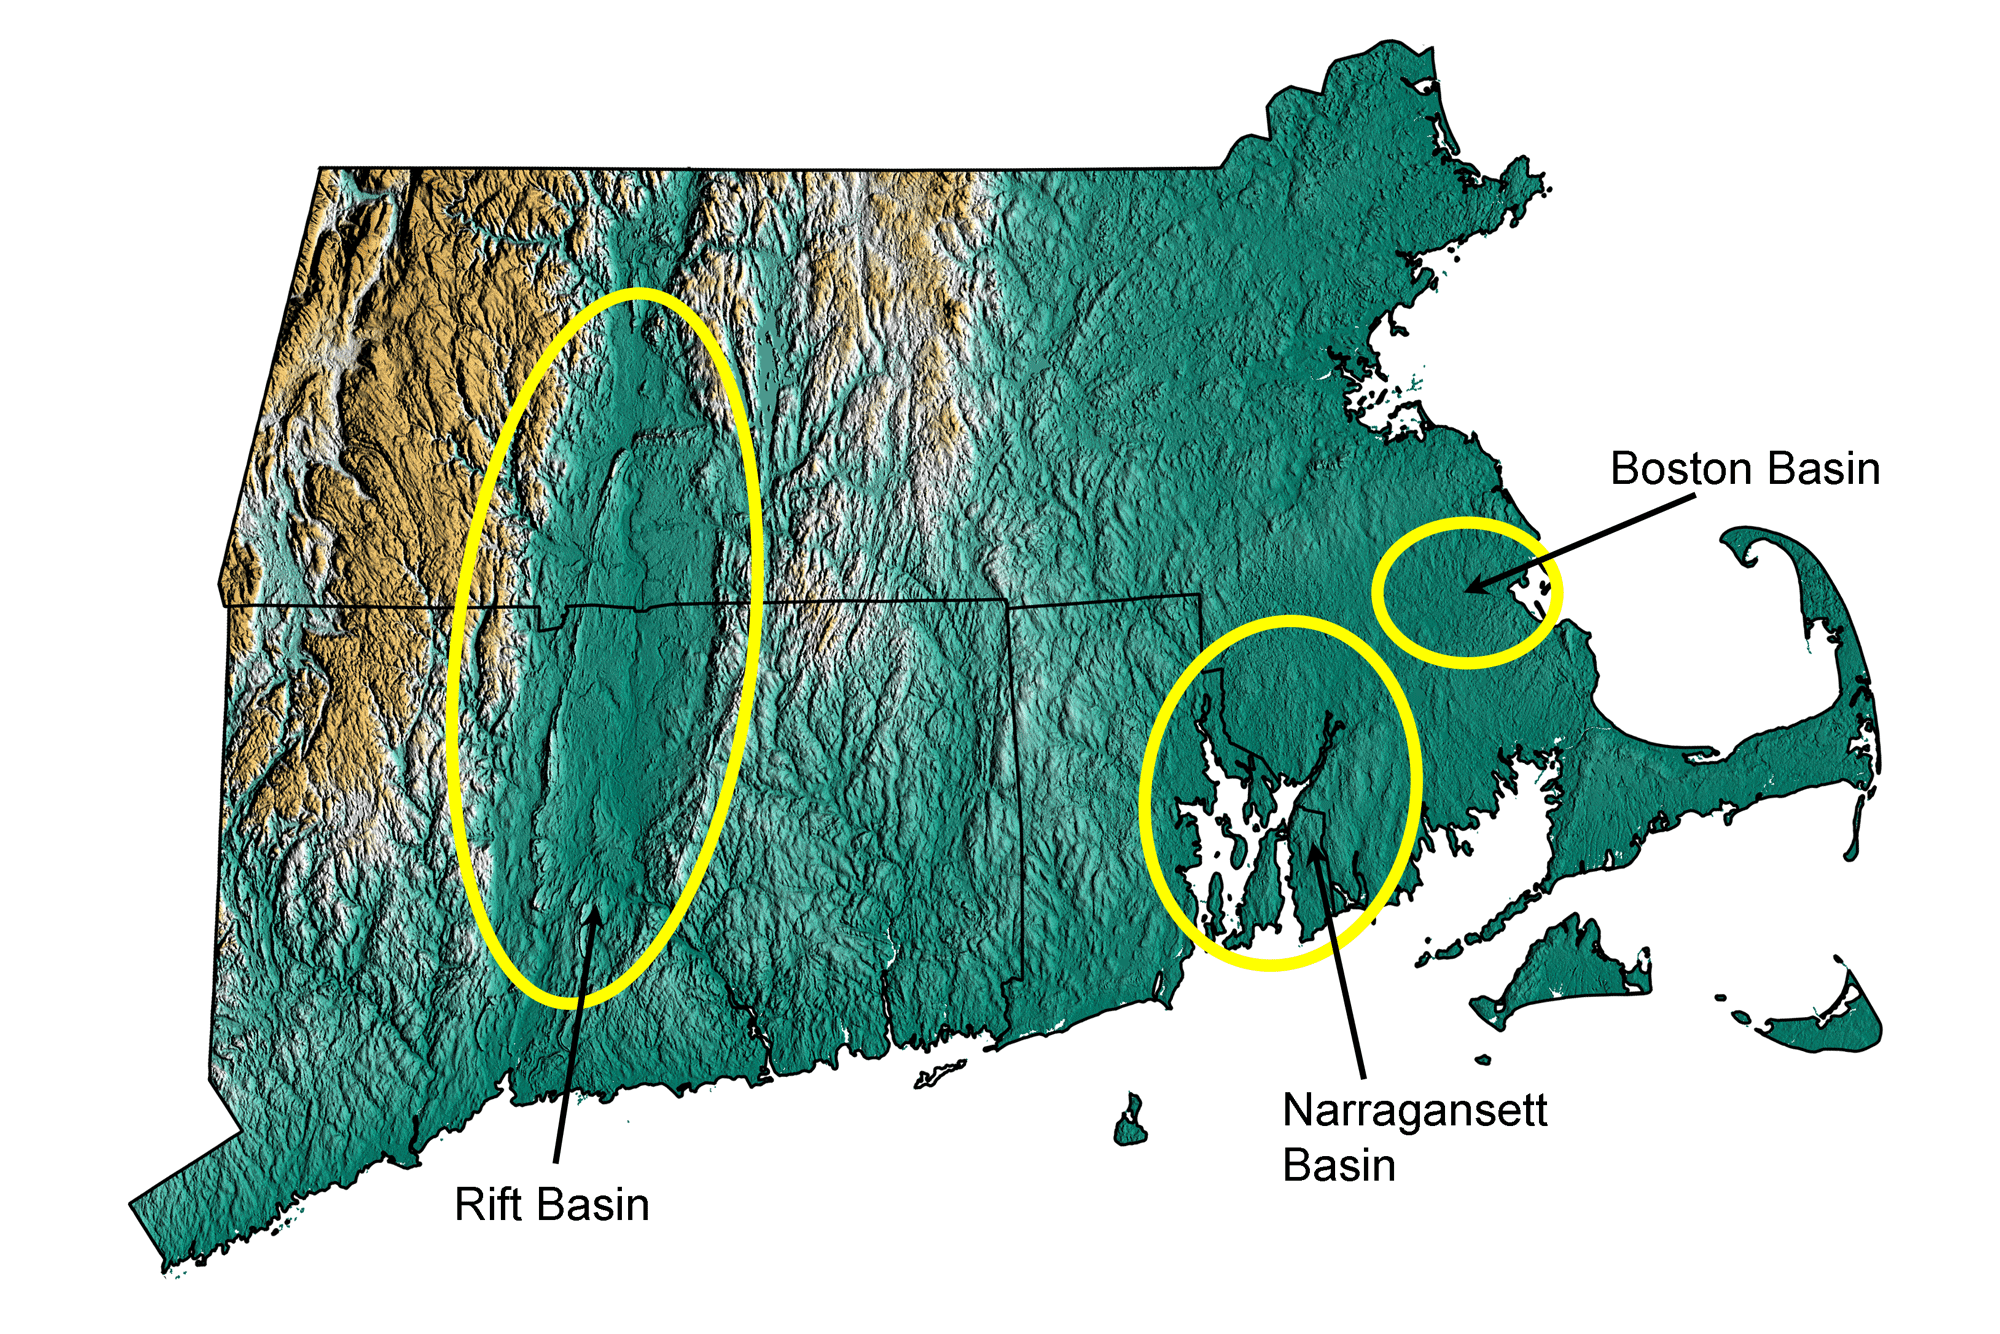 Topographic map showing the locations of the New England Basins within the Exotic Terrane region.